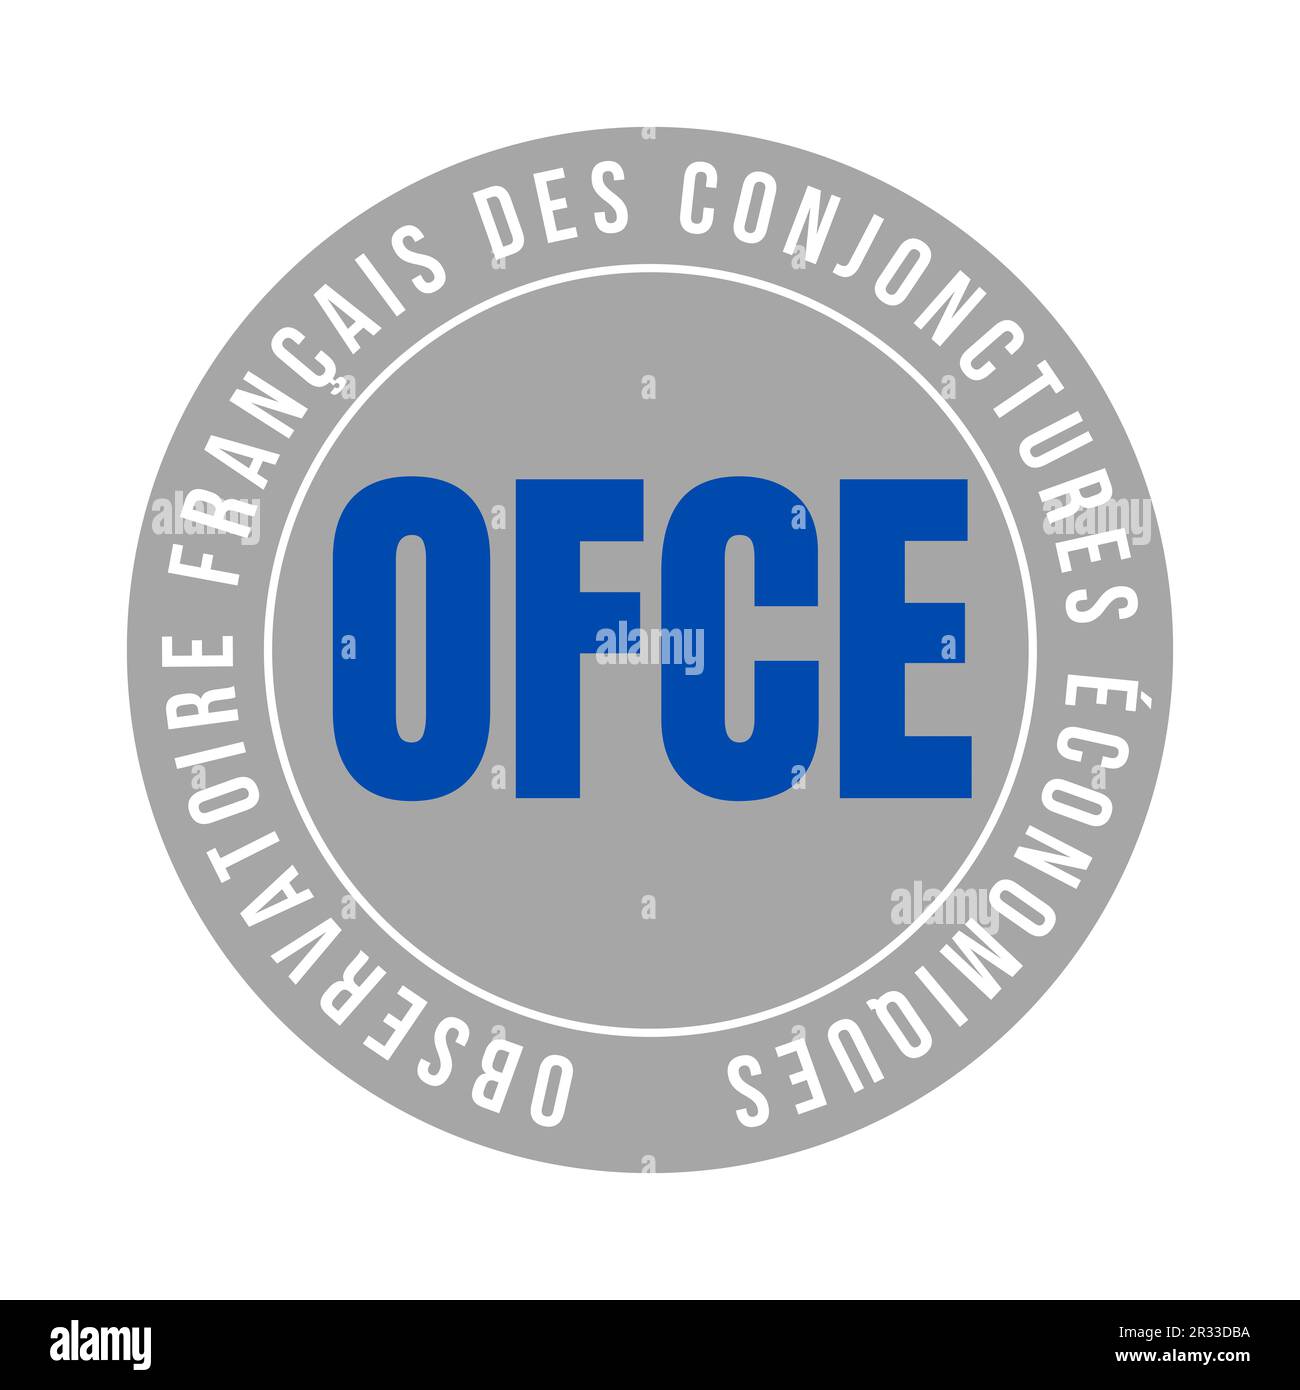 French observatory of economic conjunctures symbol icon in French language Stock Photo